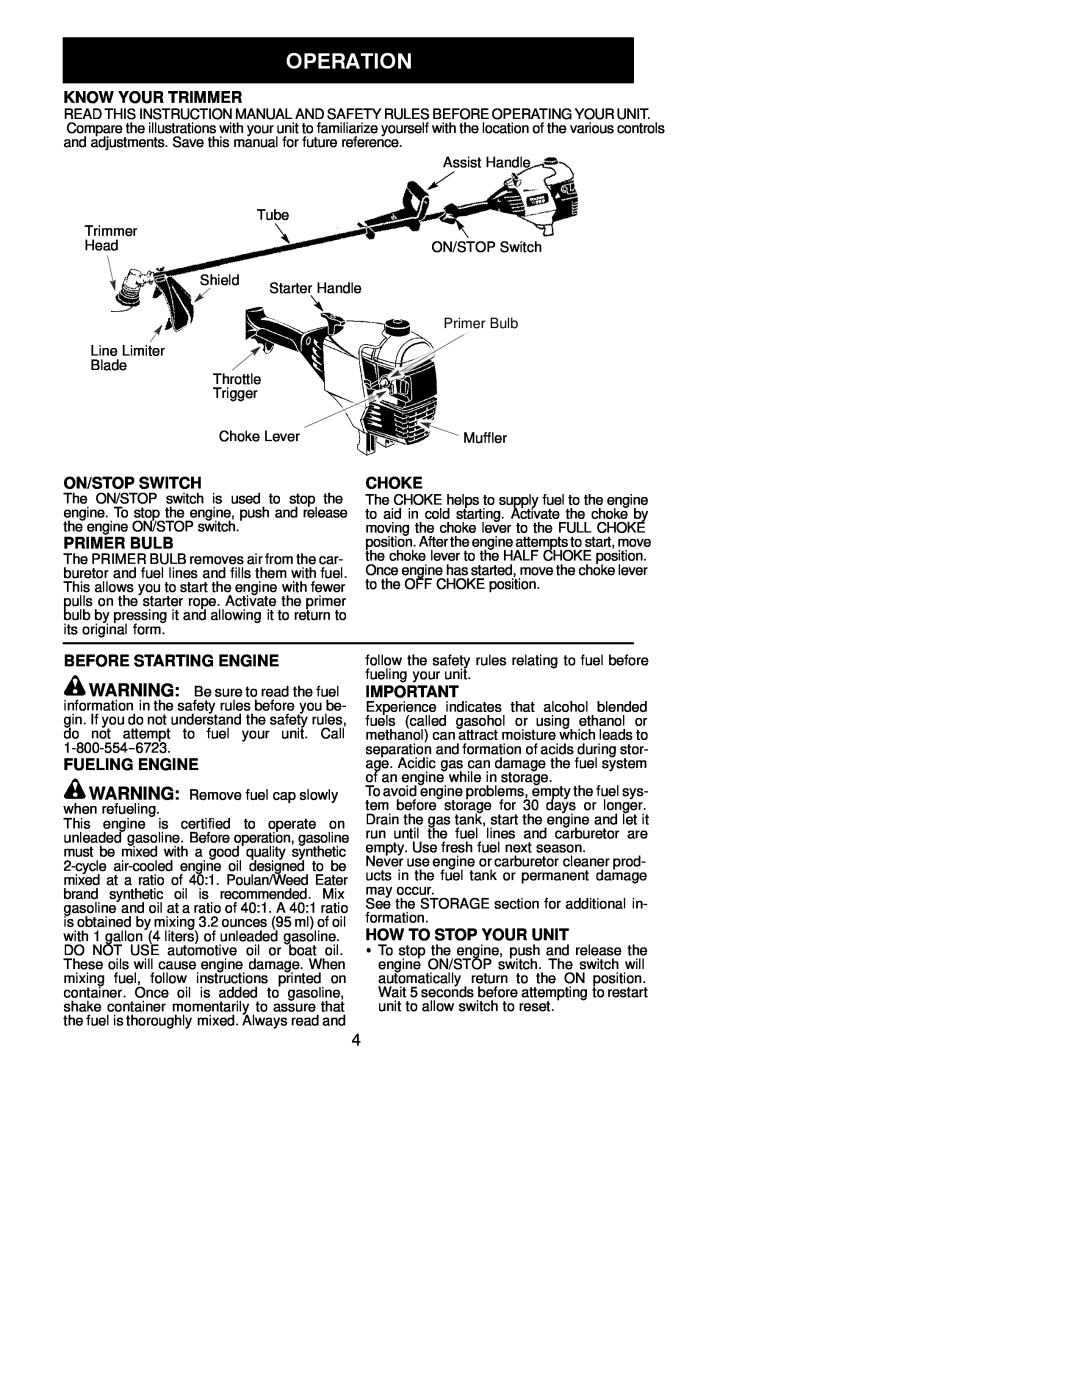 Poulan 131 instruction manual Know Your Trimmer, On/Stop Switch, Primer Bulb, Choke, Before Starting Engine, Fueling Engine 